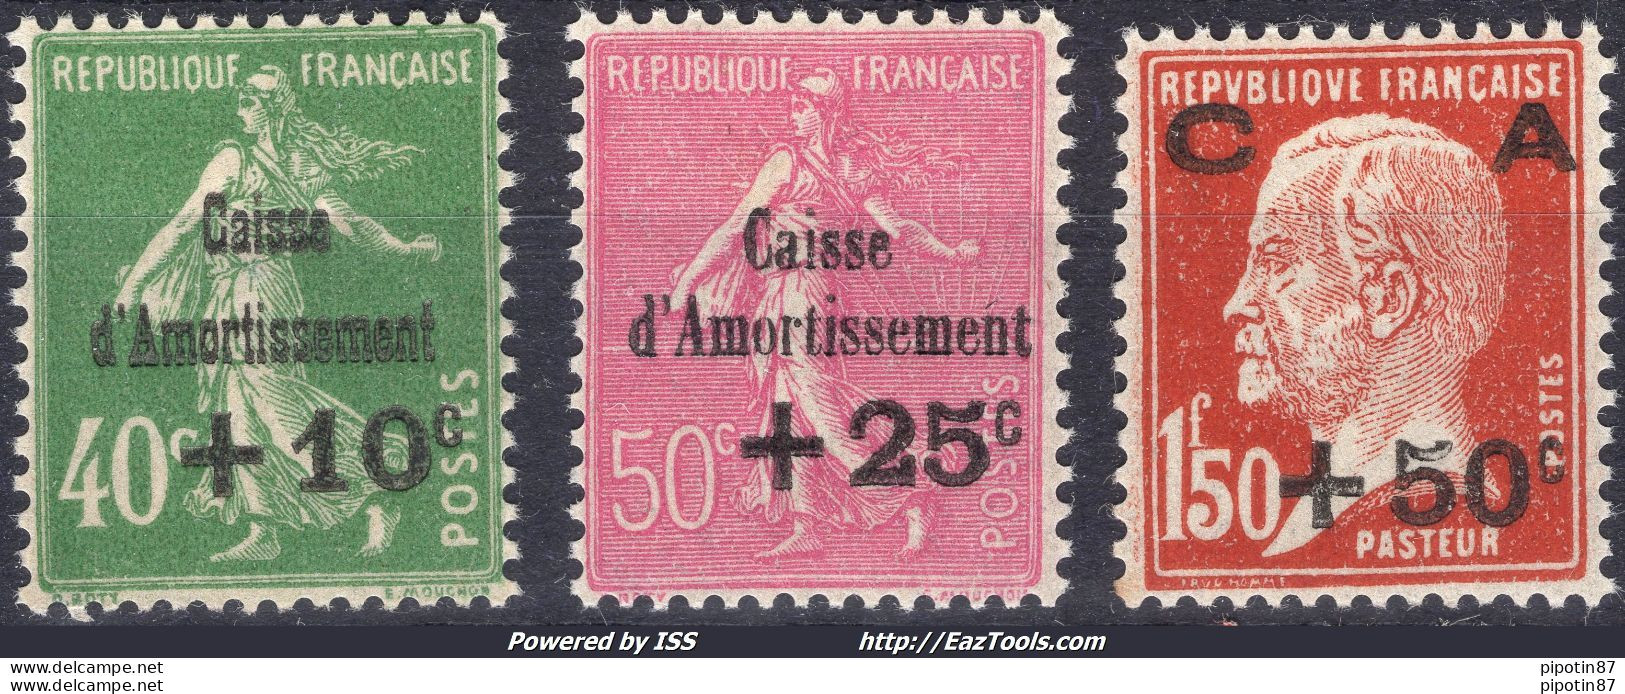 FRANCE CAISSE D'AMORTISSEMENT N° 253/255 NEUF * AVEC CHARNIERE - Unused Stamps